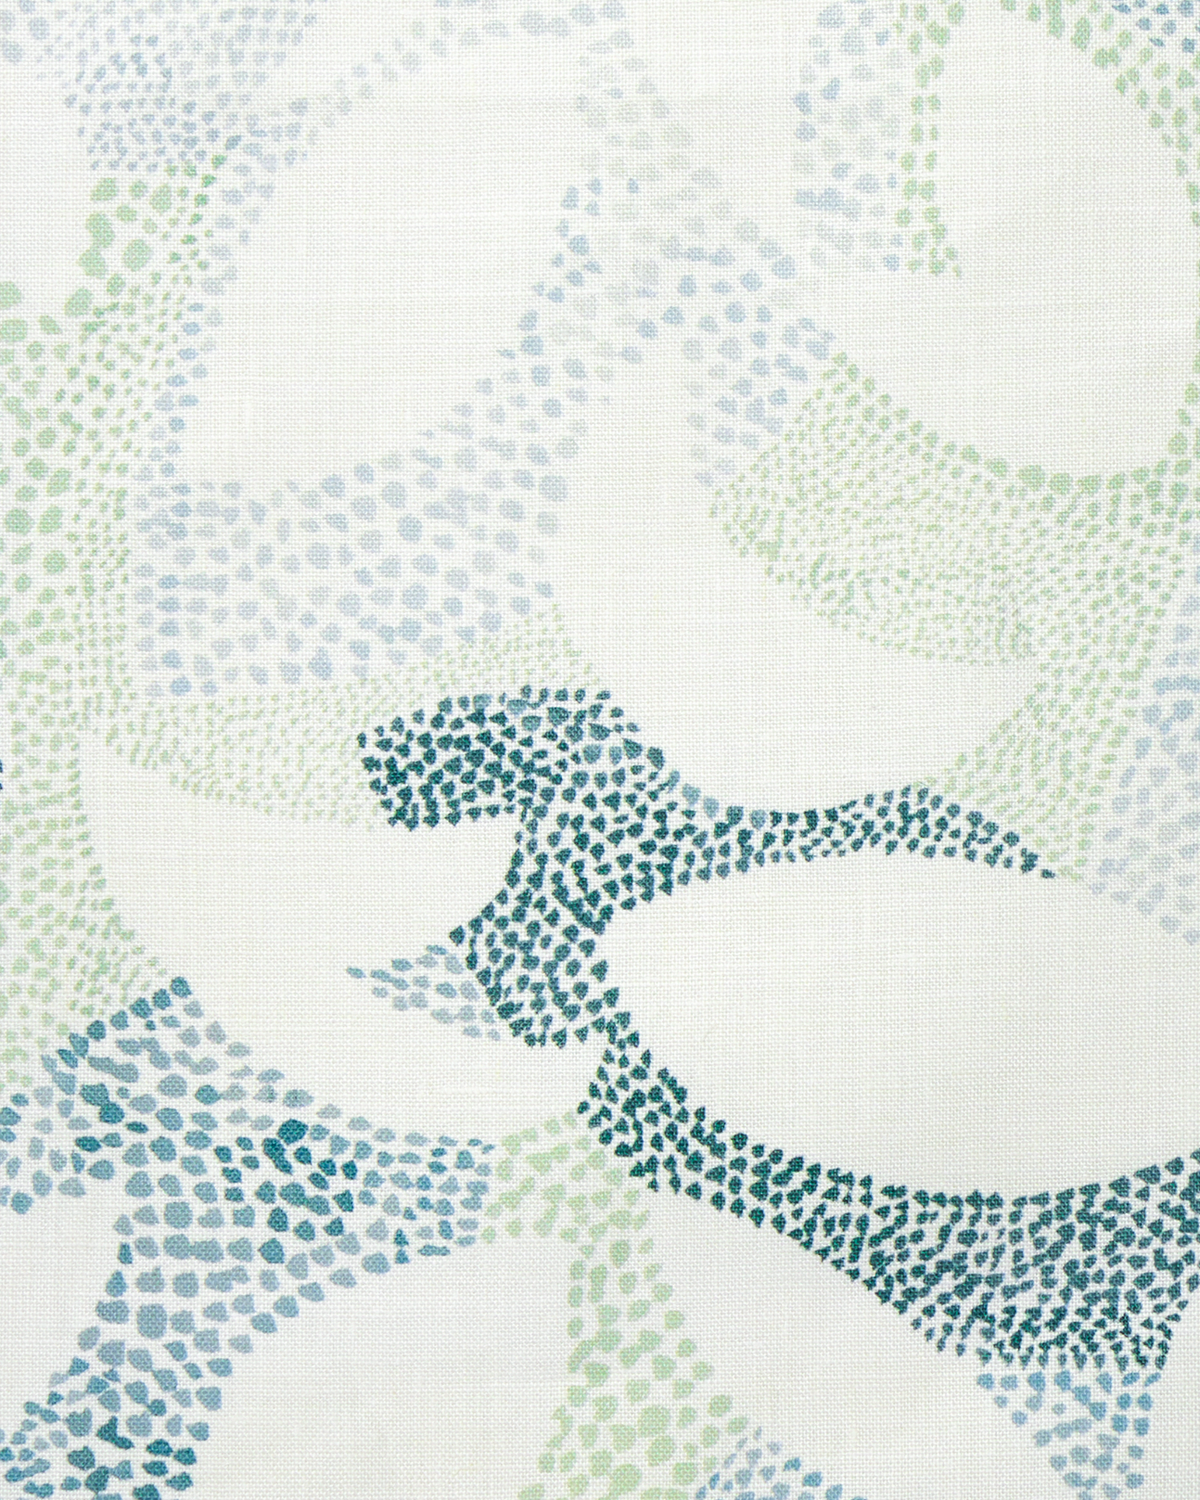 Dotted Leaves Fabric in Garden Green